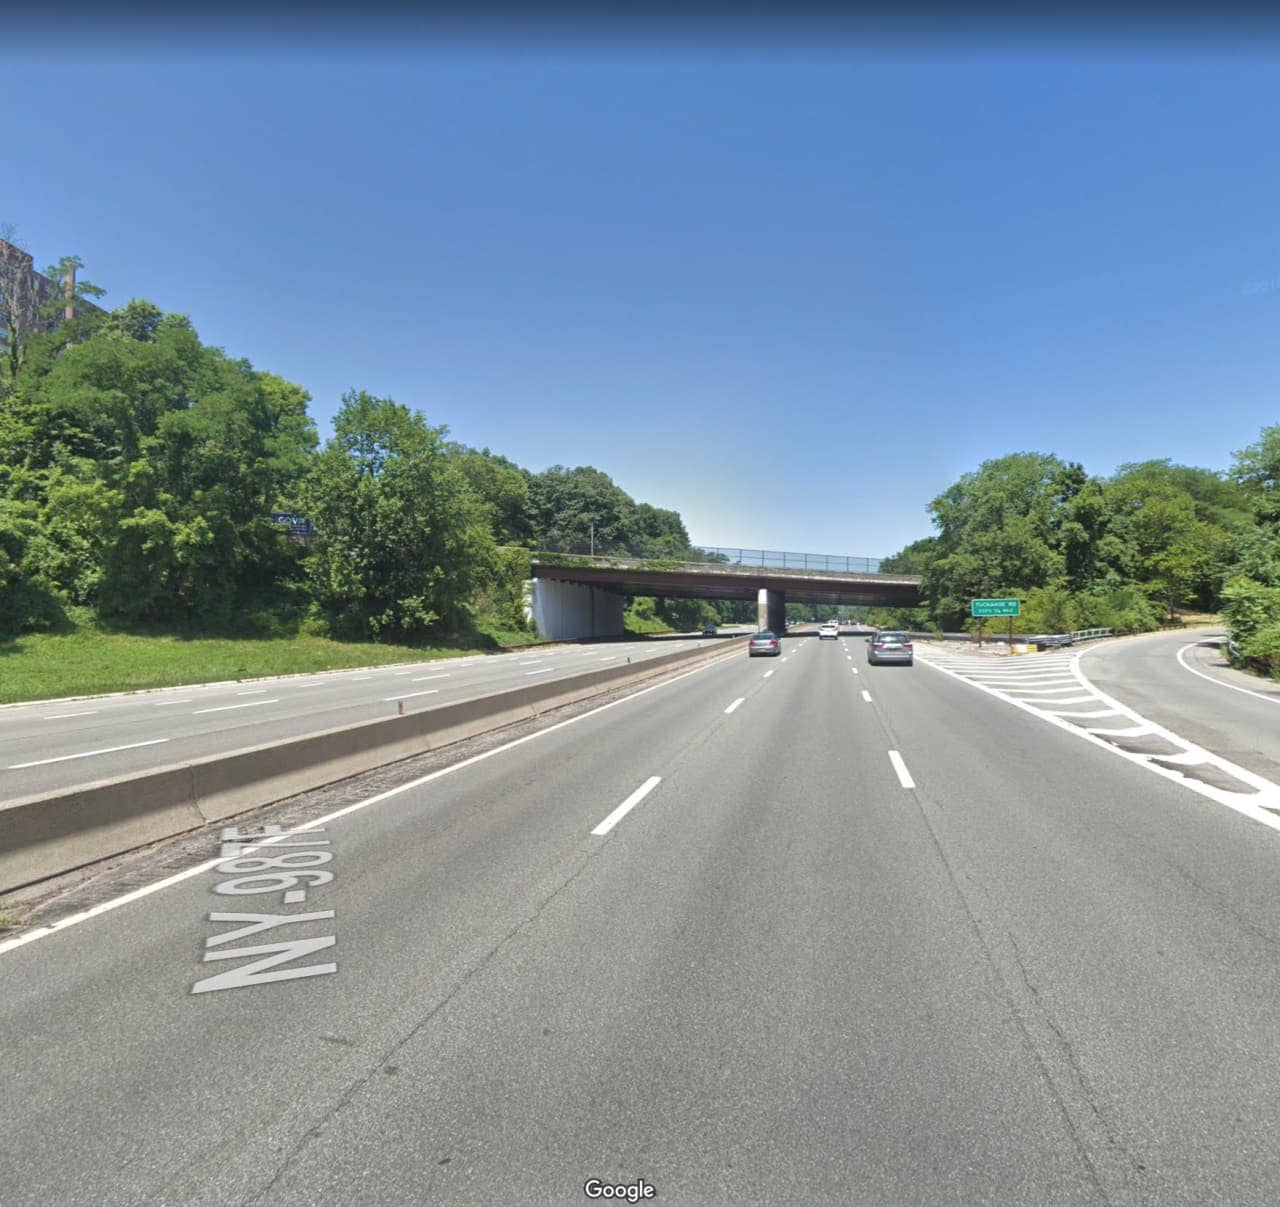 Two northbound lanes of the Sprain Brook Parkway in Yonkers remained closed due to a serious three-vehicle crash.